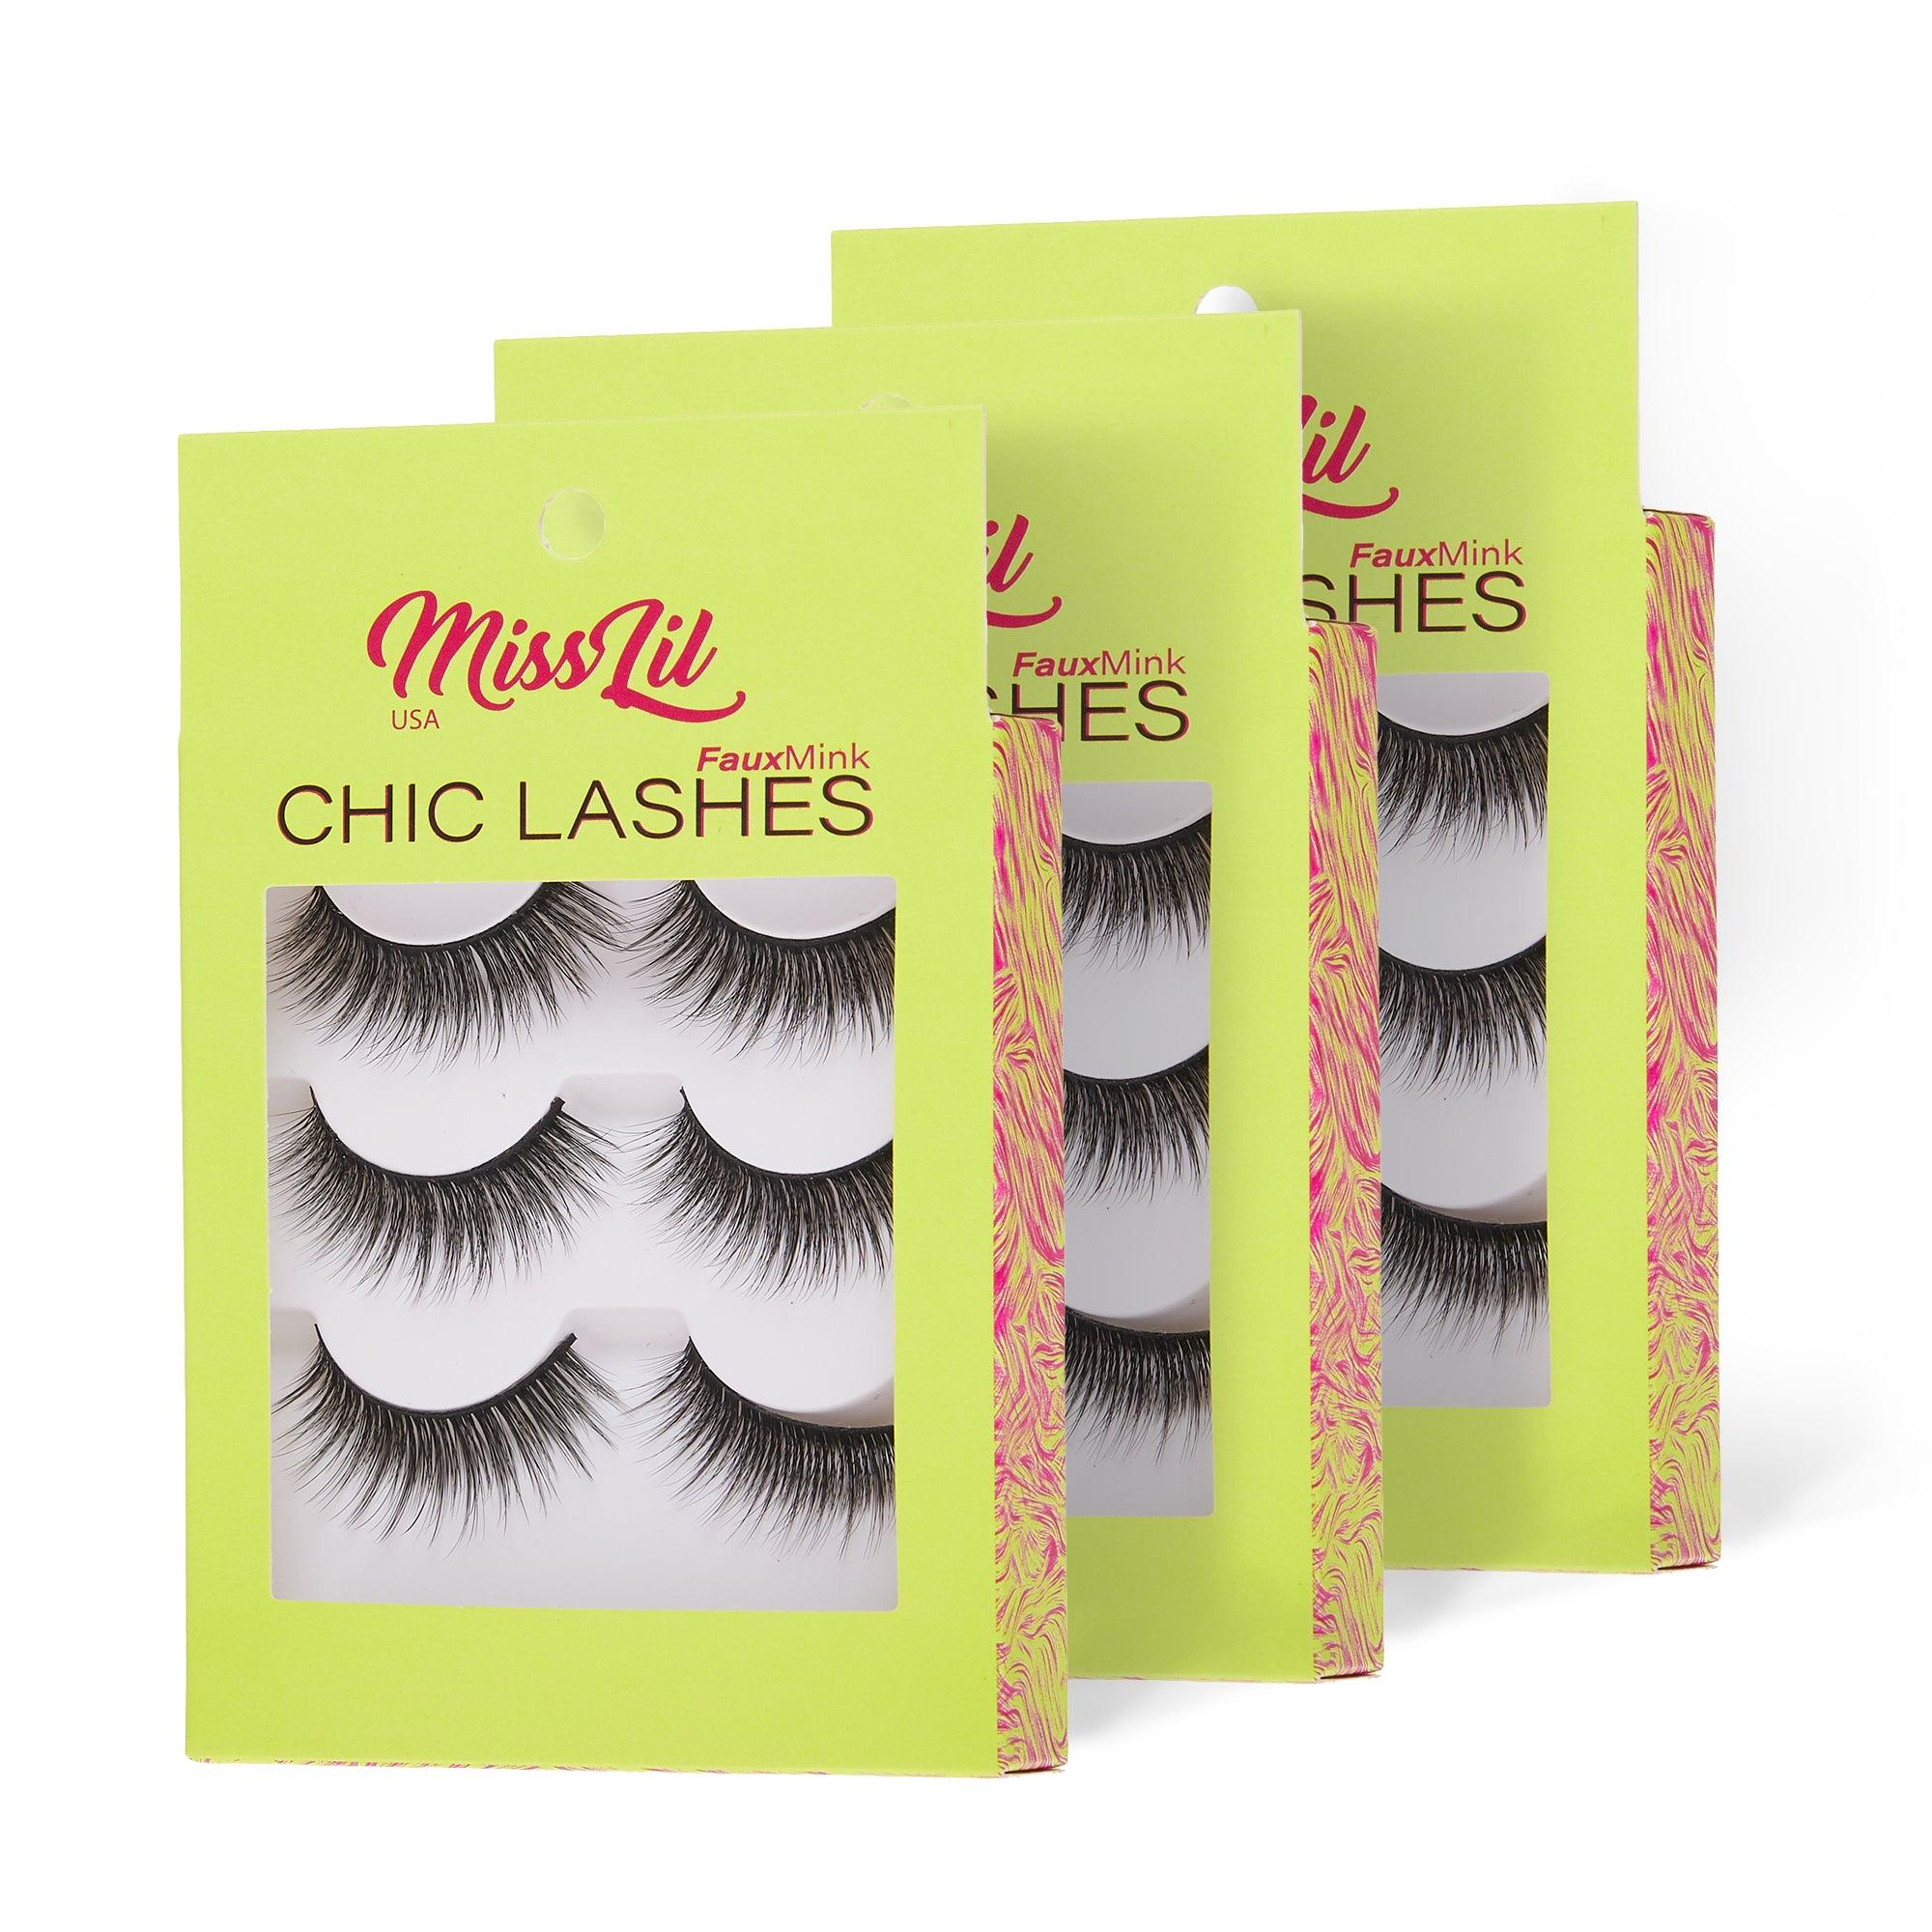 3-Pairs Lashes-Chic Lashes Collection #31 (Pack of 12) - Miss Lil USA Wholesale